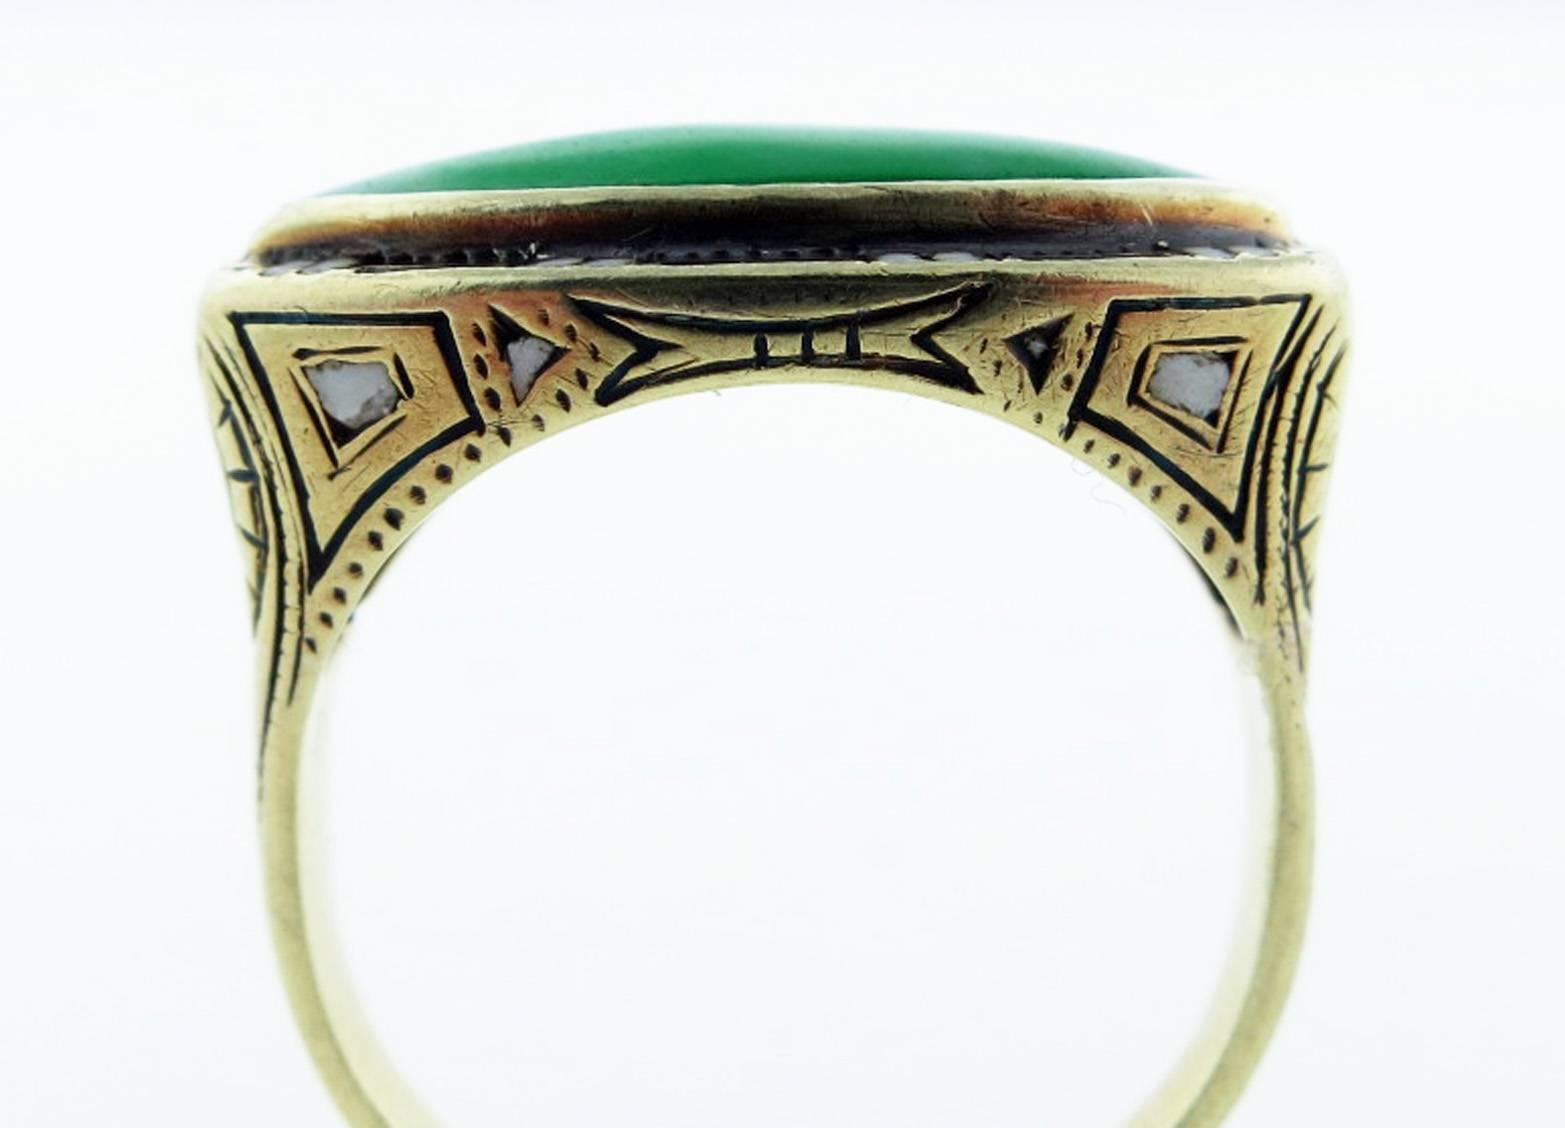 A fine Art Deco treasure in the Egyptian revival style circa 1925. The mounting is finely engraved and set with a marquise cut natural jade cabochon accented with black and white enamel. The ring is size 5 and can be sized.